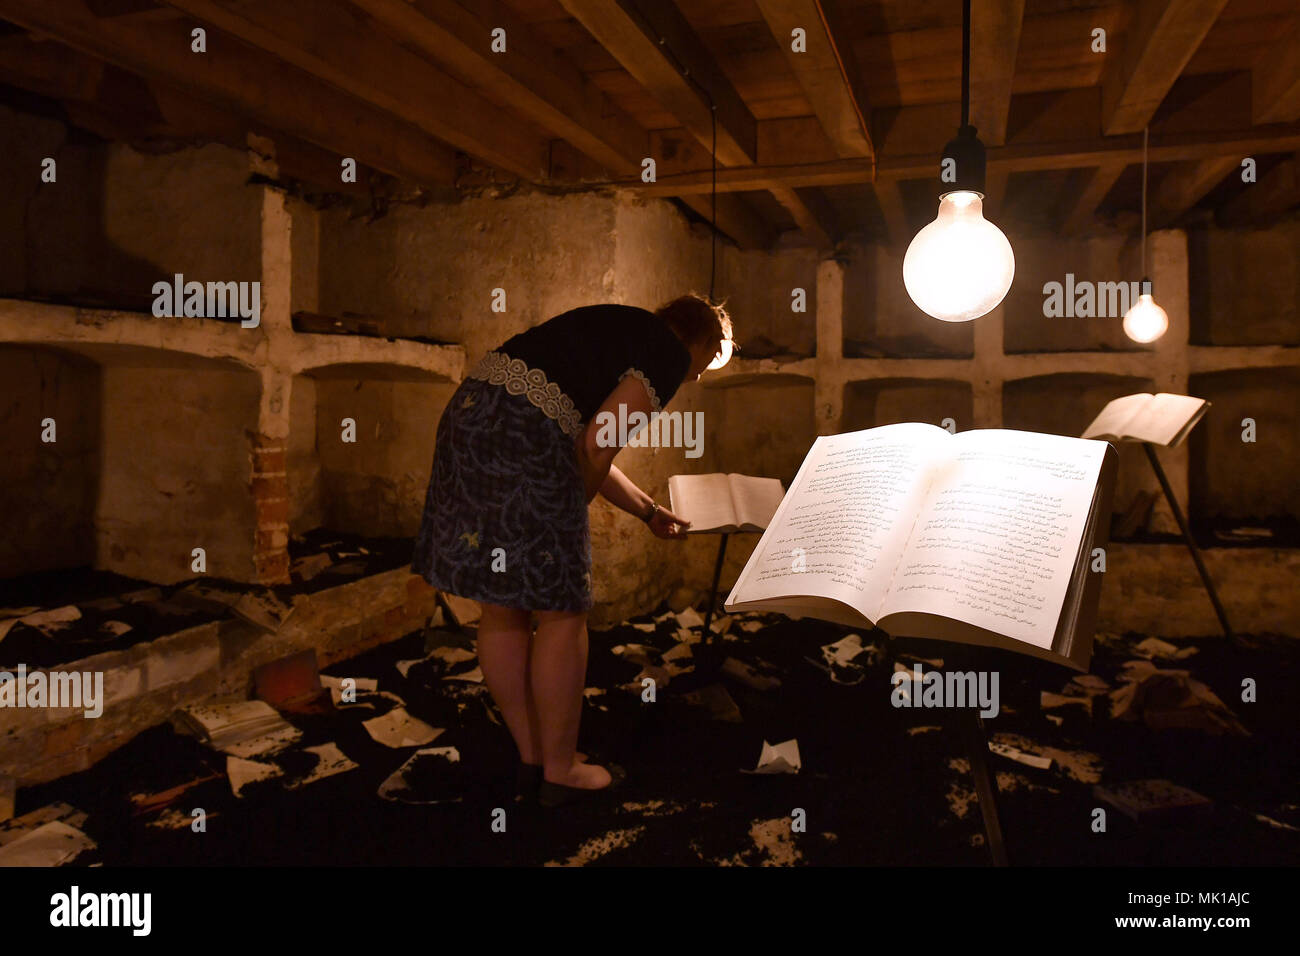 A visitor views books in the cellar of Blickling Hall in Norfolk which has been recreated to depict a university library destroyed by militants in Mosul, Iraq as part of the new art installation 'The Word Defiant!' which reveals stories of books that have been banned, burned, redacted, drowned, neglected and superseded. Stock Photo